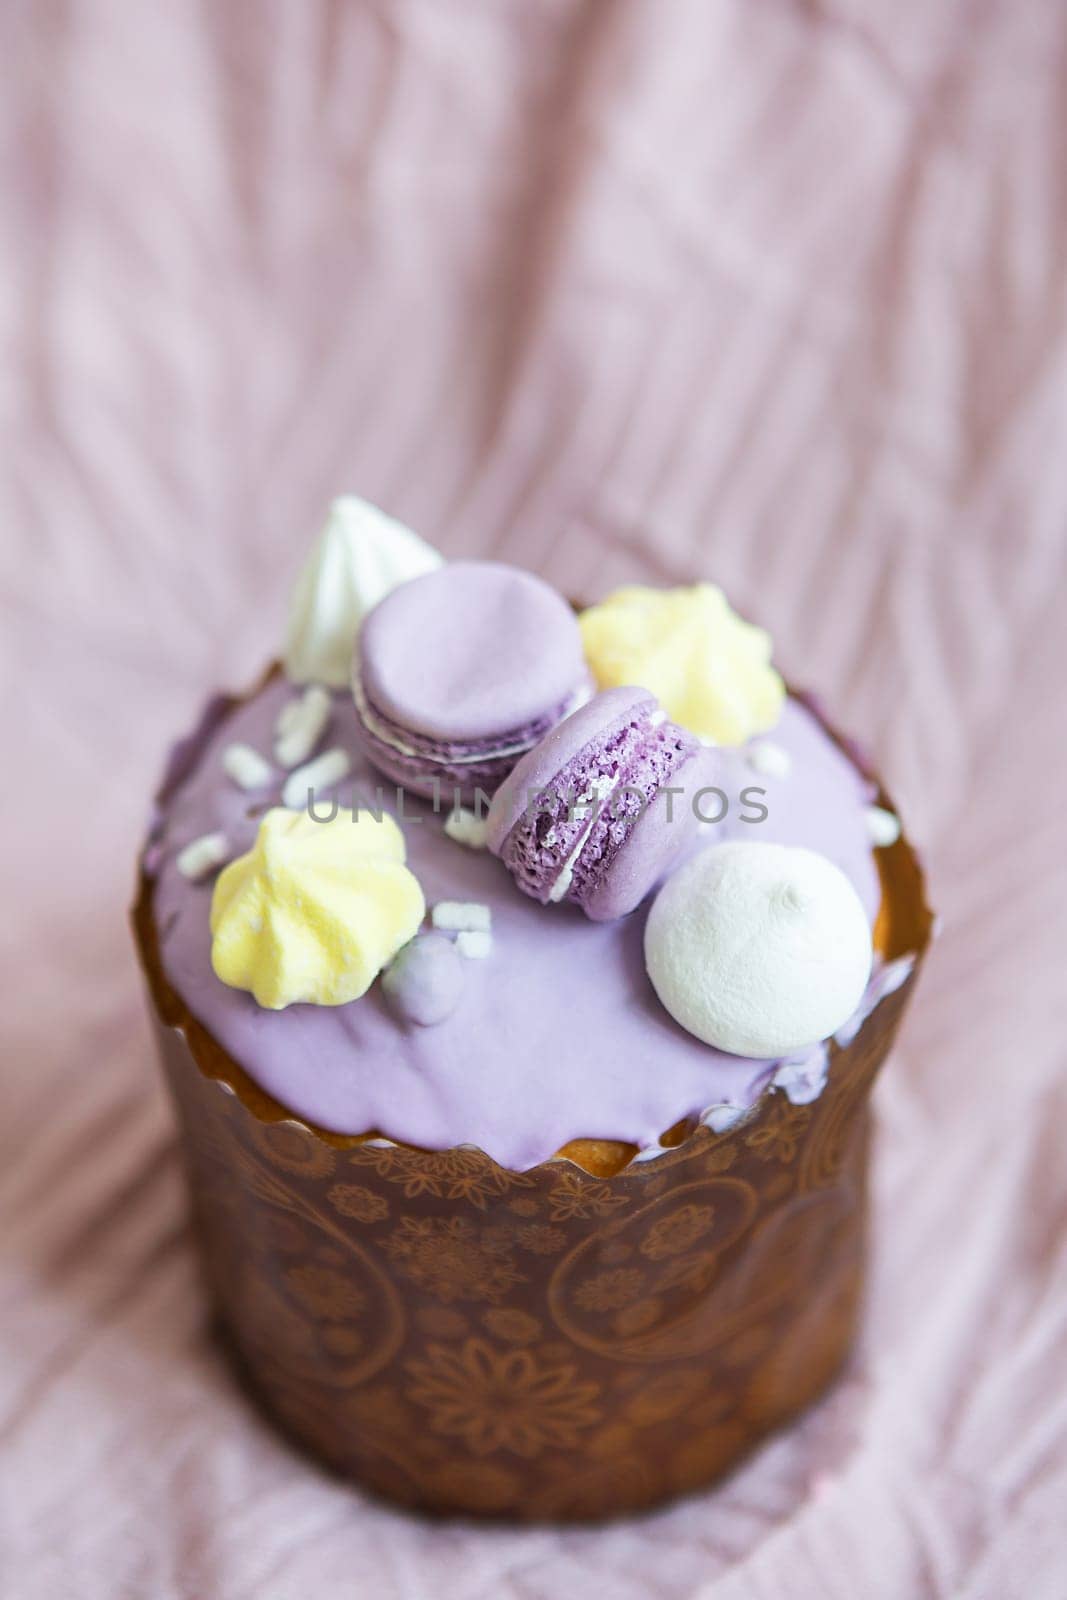 A traditional paska decorated with white Swiss chocolate and meringue stands on a lavender tablecloth. Easter holiday